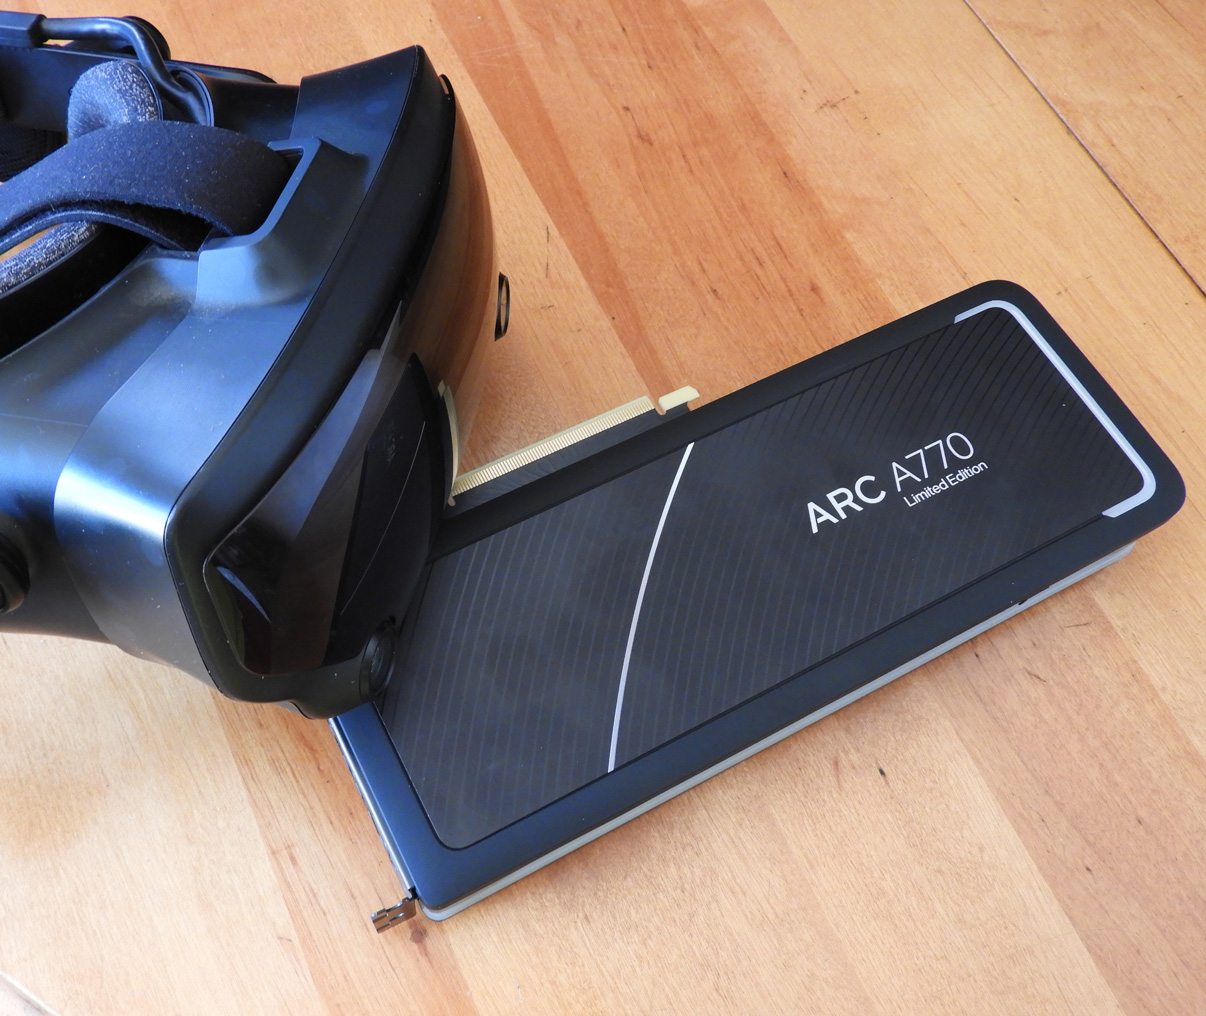 Intel’s Arc Cards do Not Work with Native SteamVR Headsets